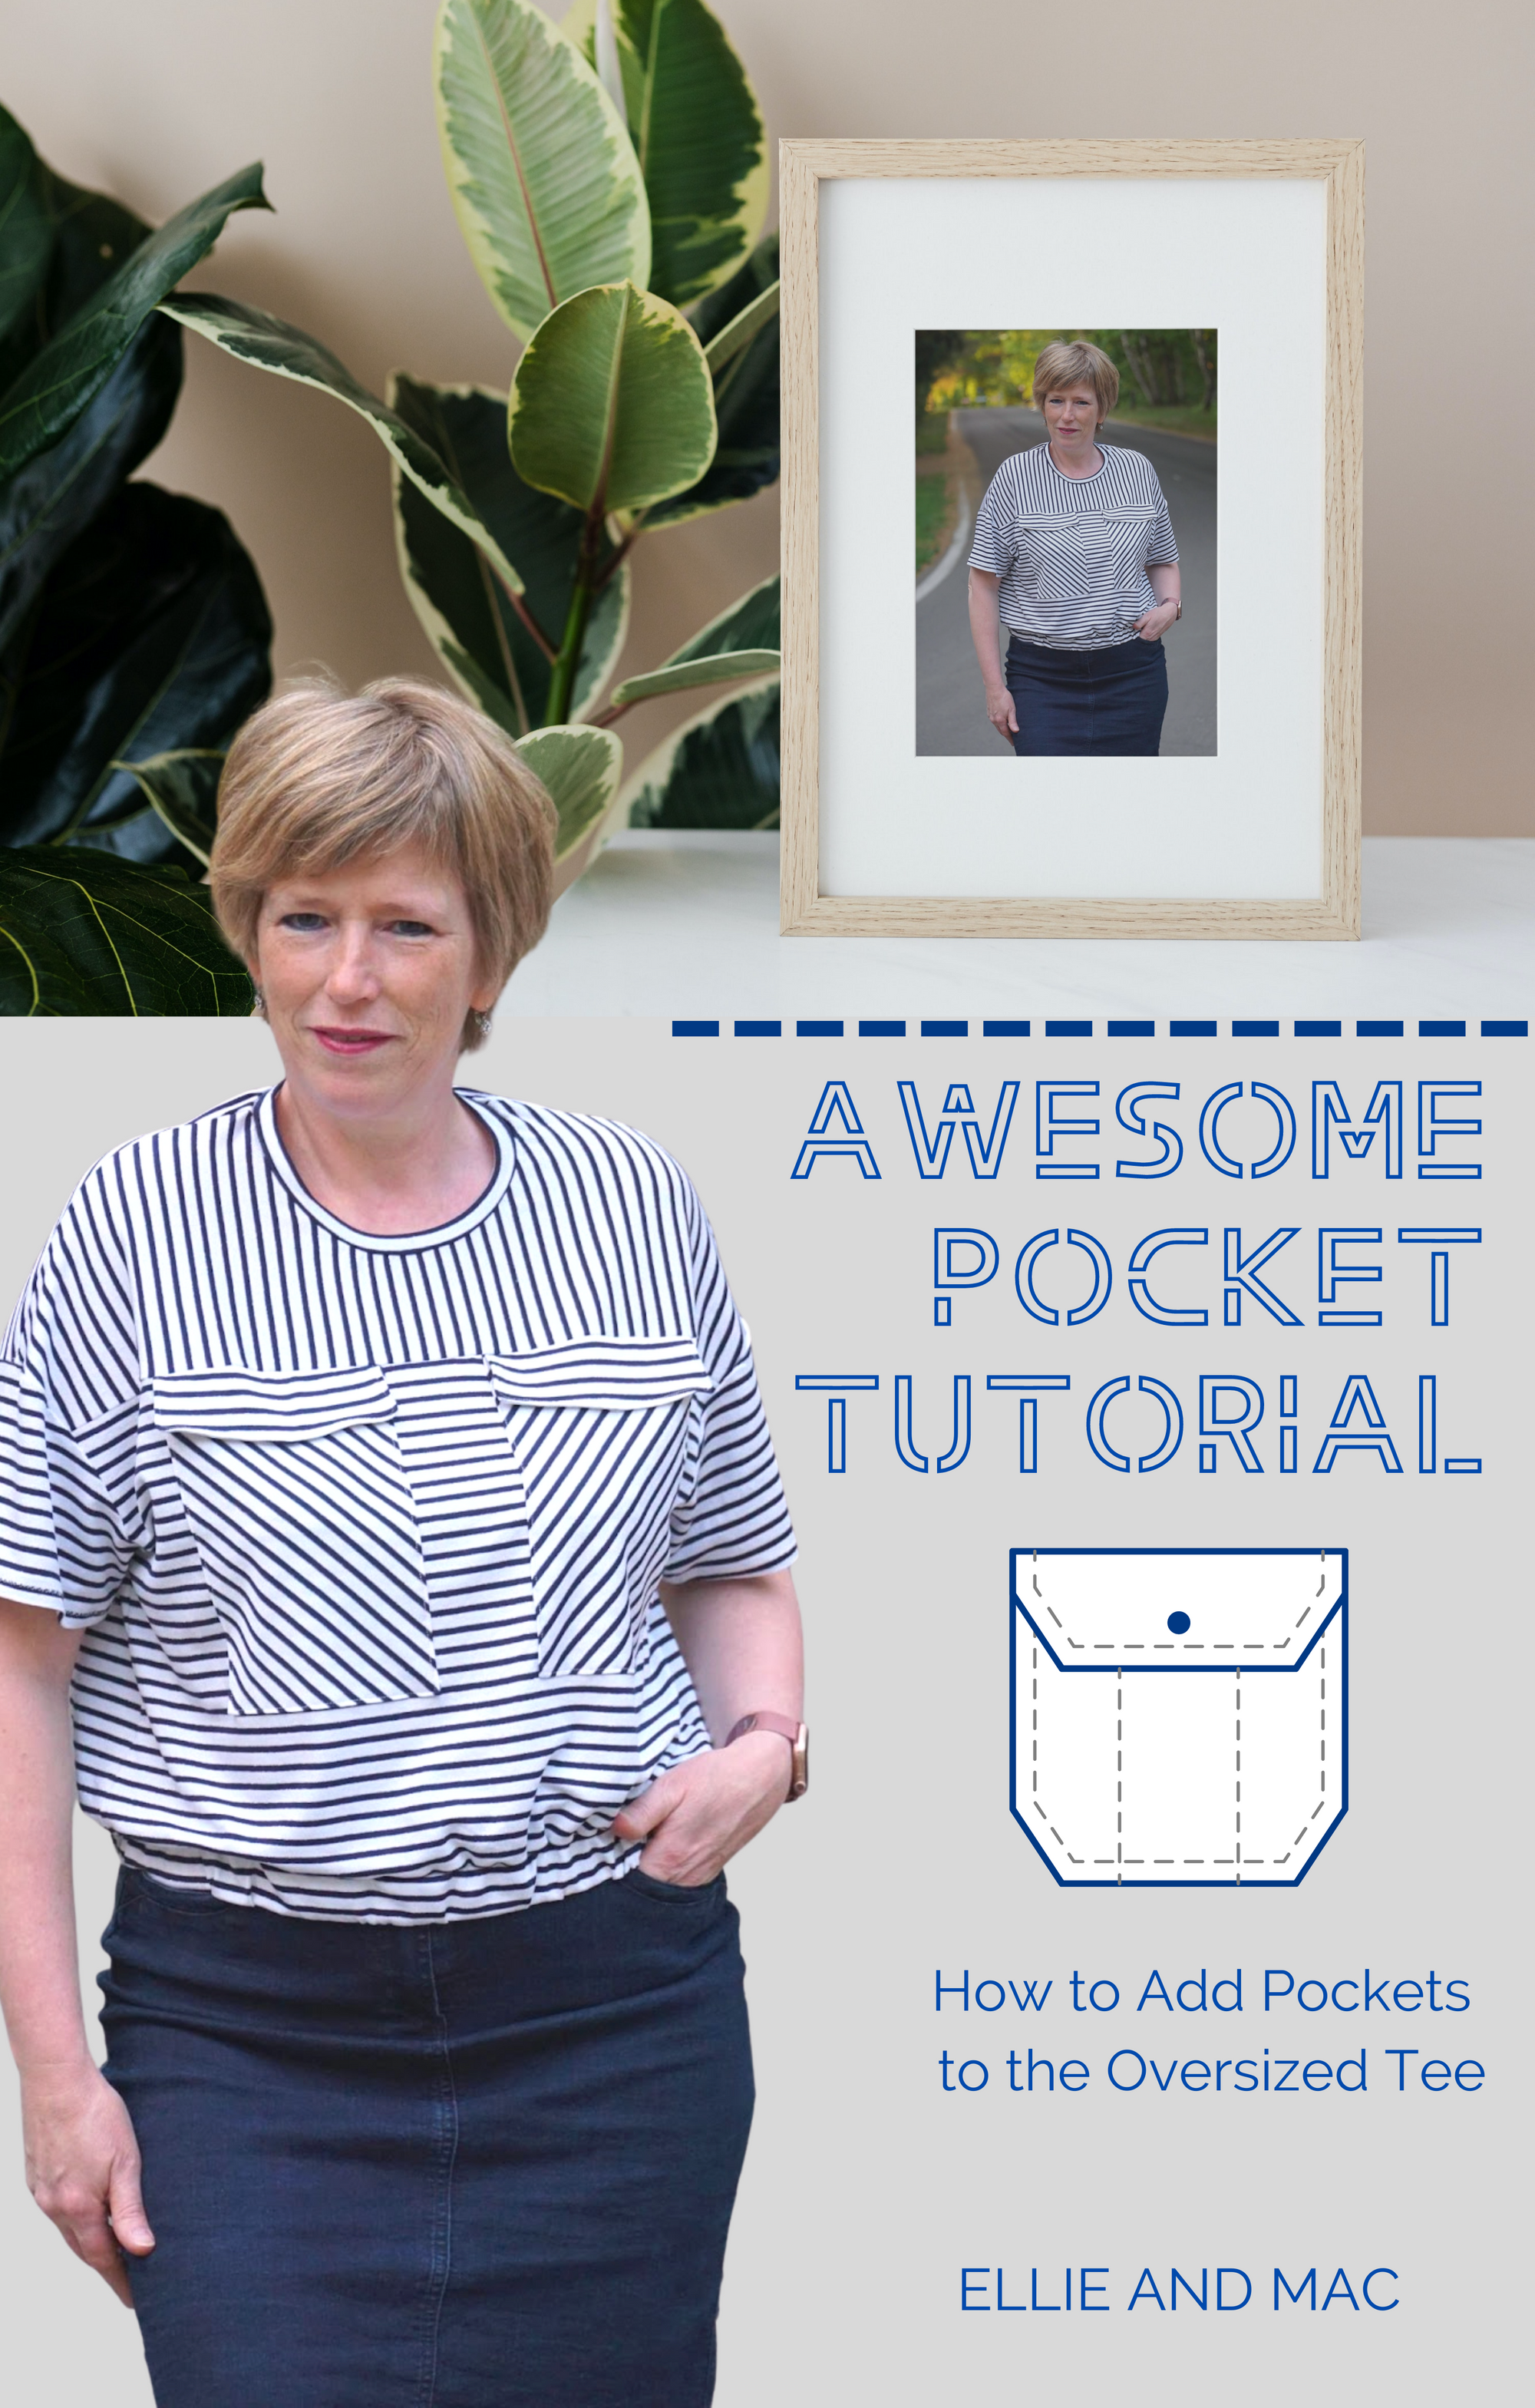 Awesome Pocket Tutorial: How to Add Pockets to The Oversized Tee